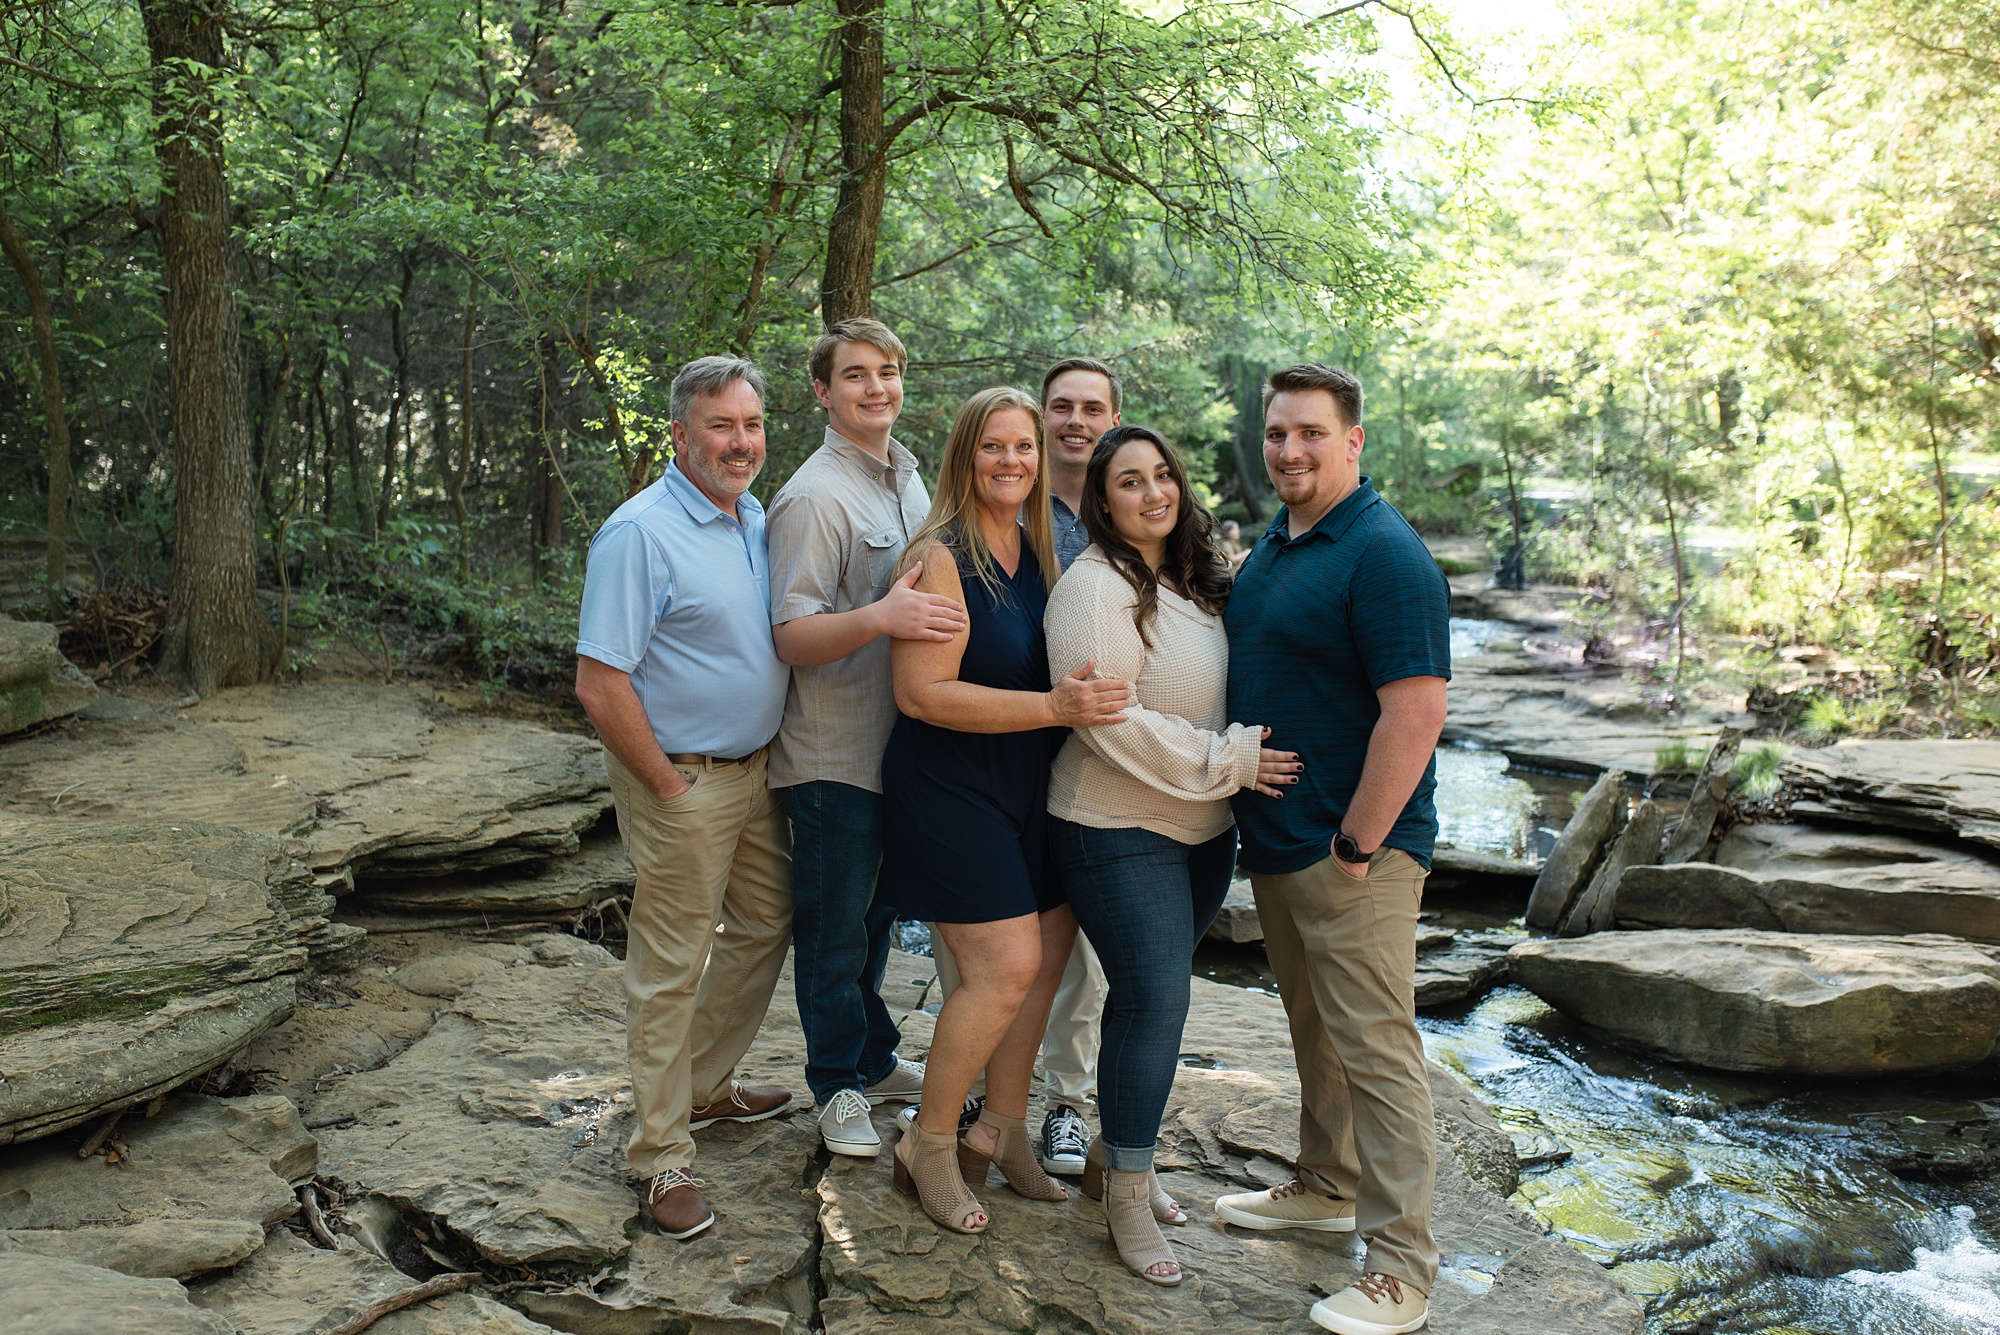 family poses together on rock bed in Stone Creek Park